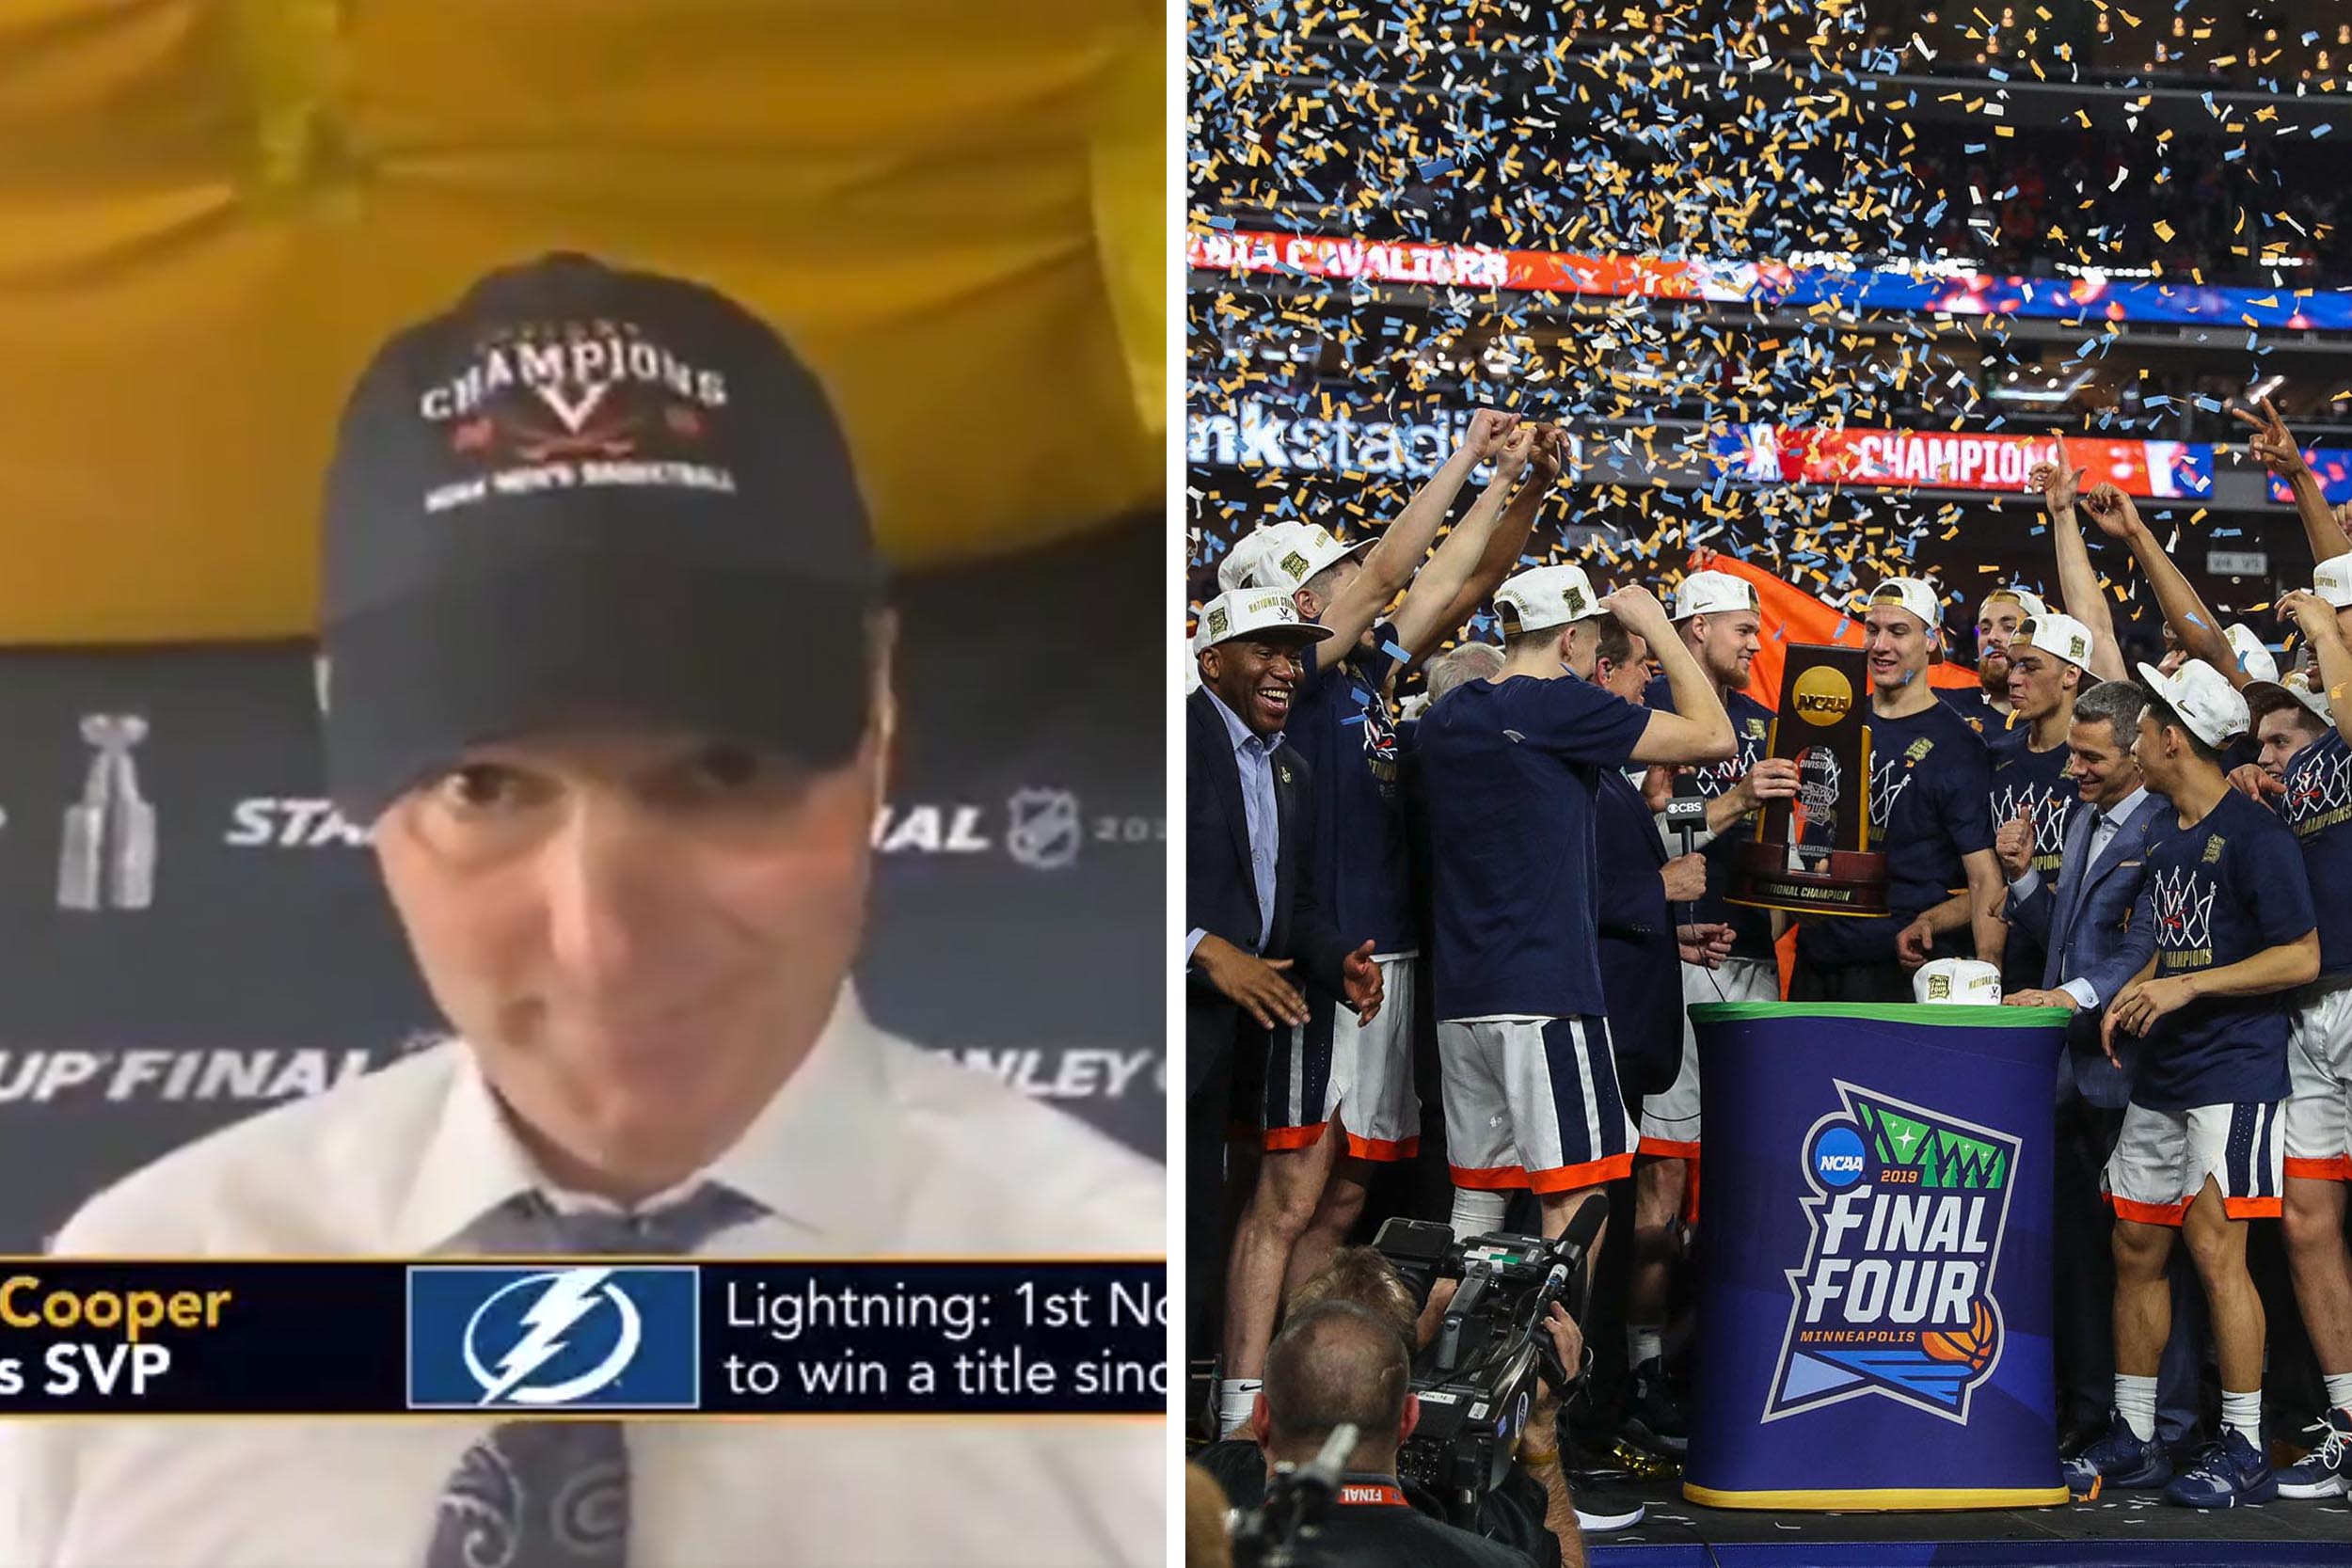 Jon Cooper, left, wearing a UVA hat on ESPN, Right: UVA basketball team celebrating as a team lifting up the NCAA trophy